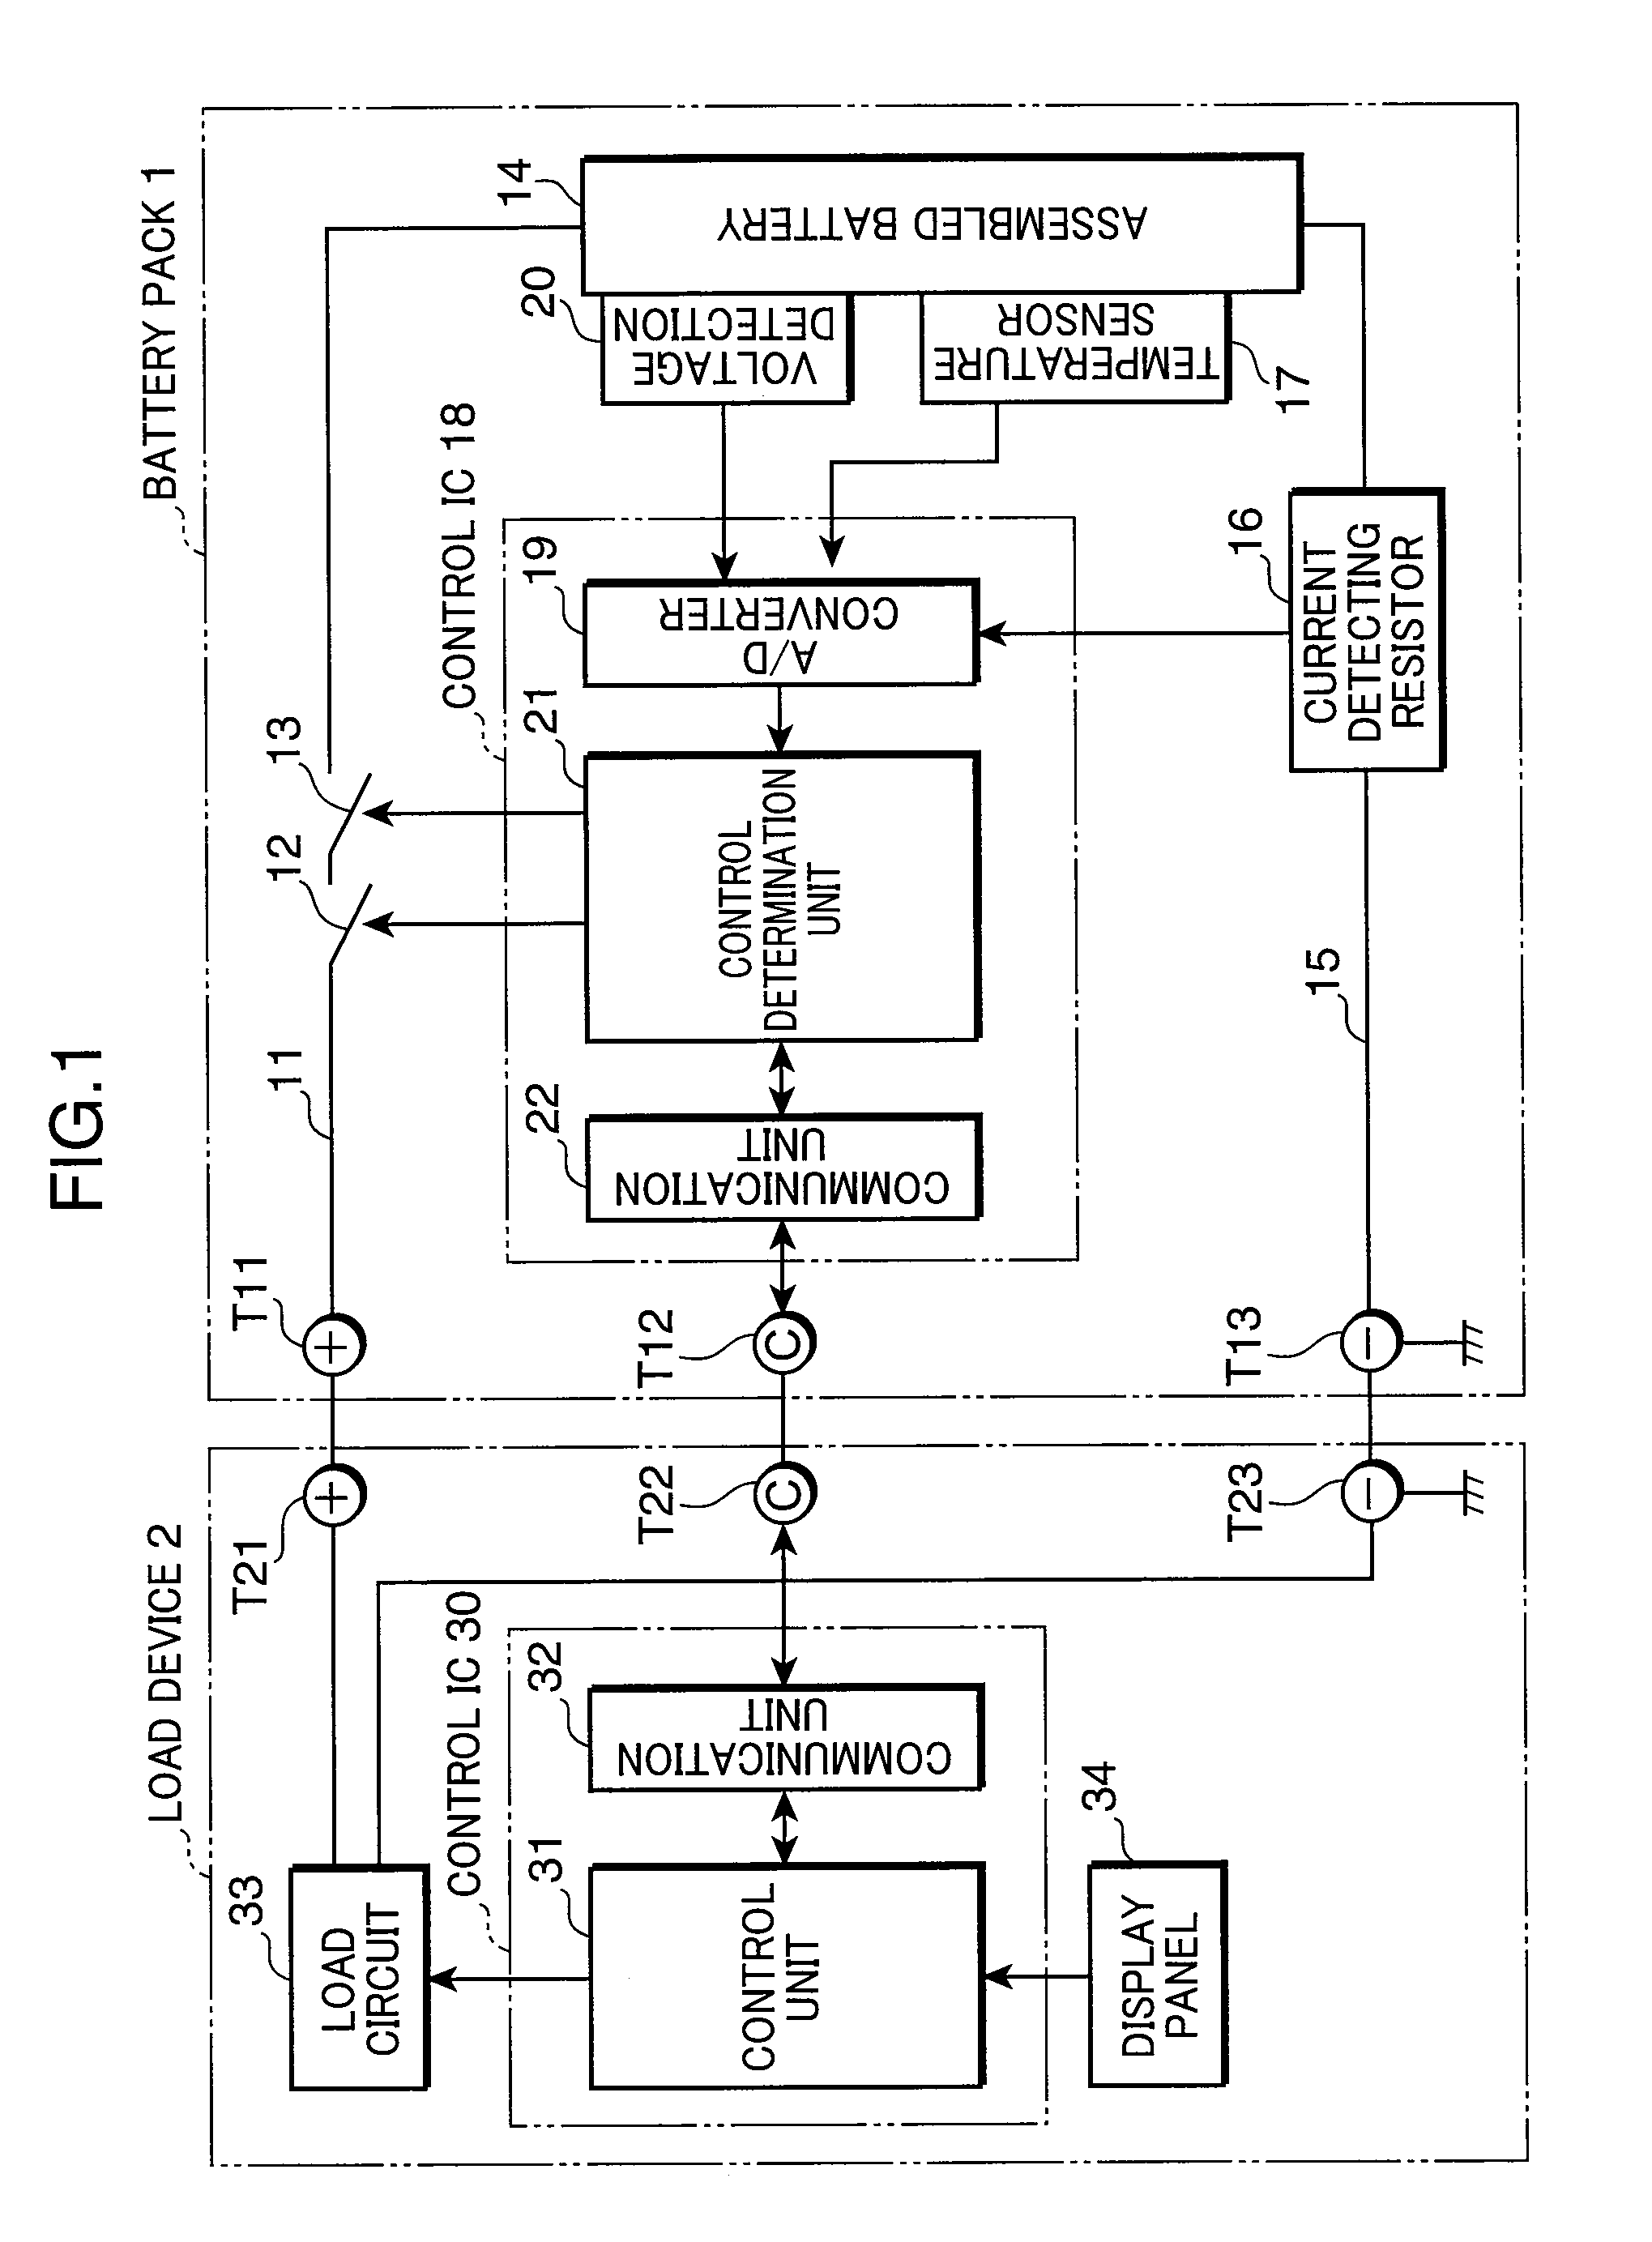 Battery internal short-circuit detection apparatus and method, and battery pack